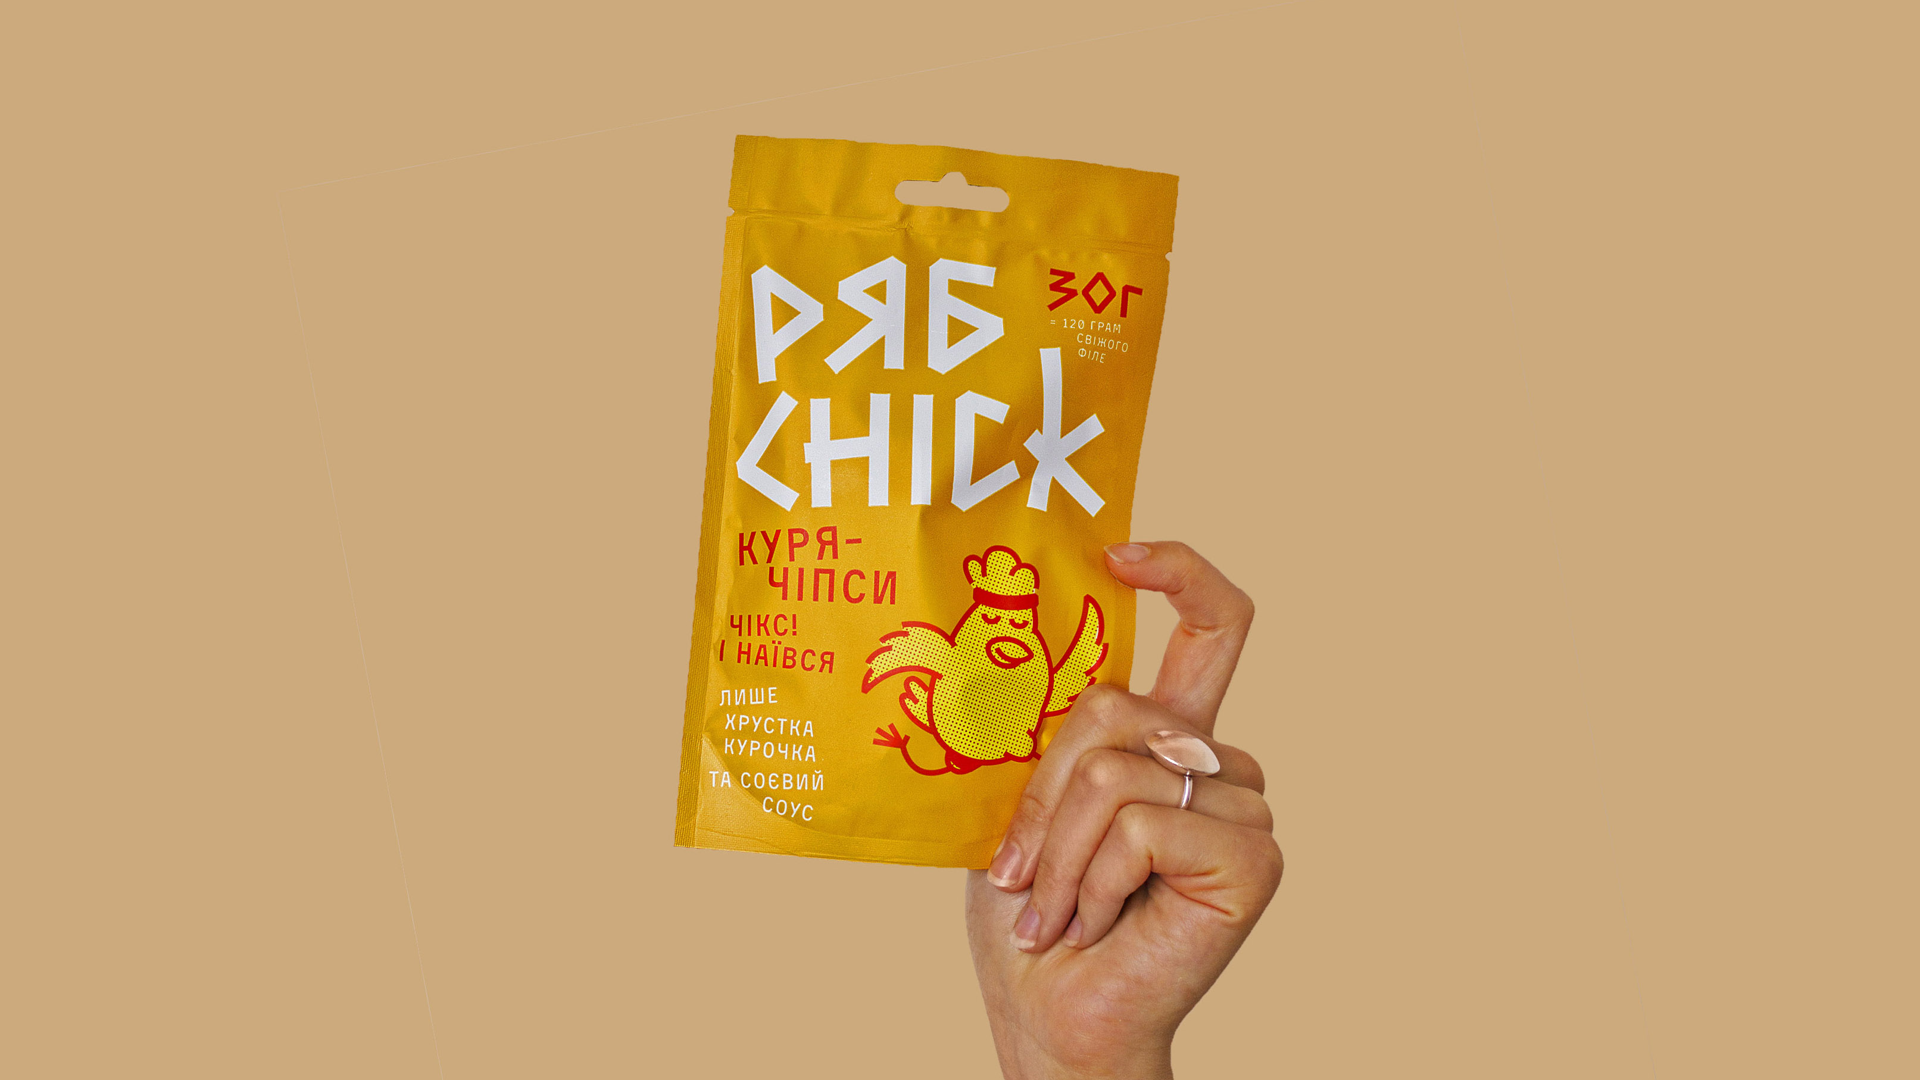 Featured image for Ryabchick Is A Crunchy Snack On The Run